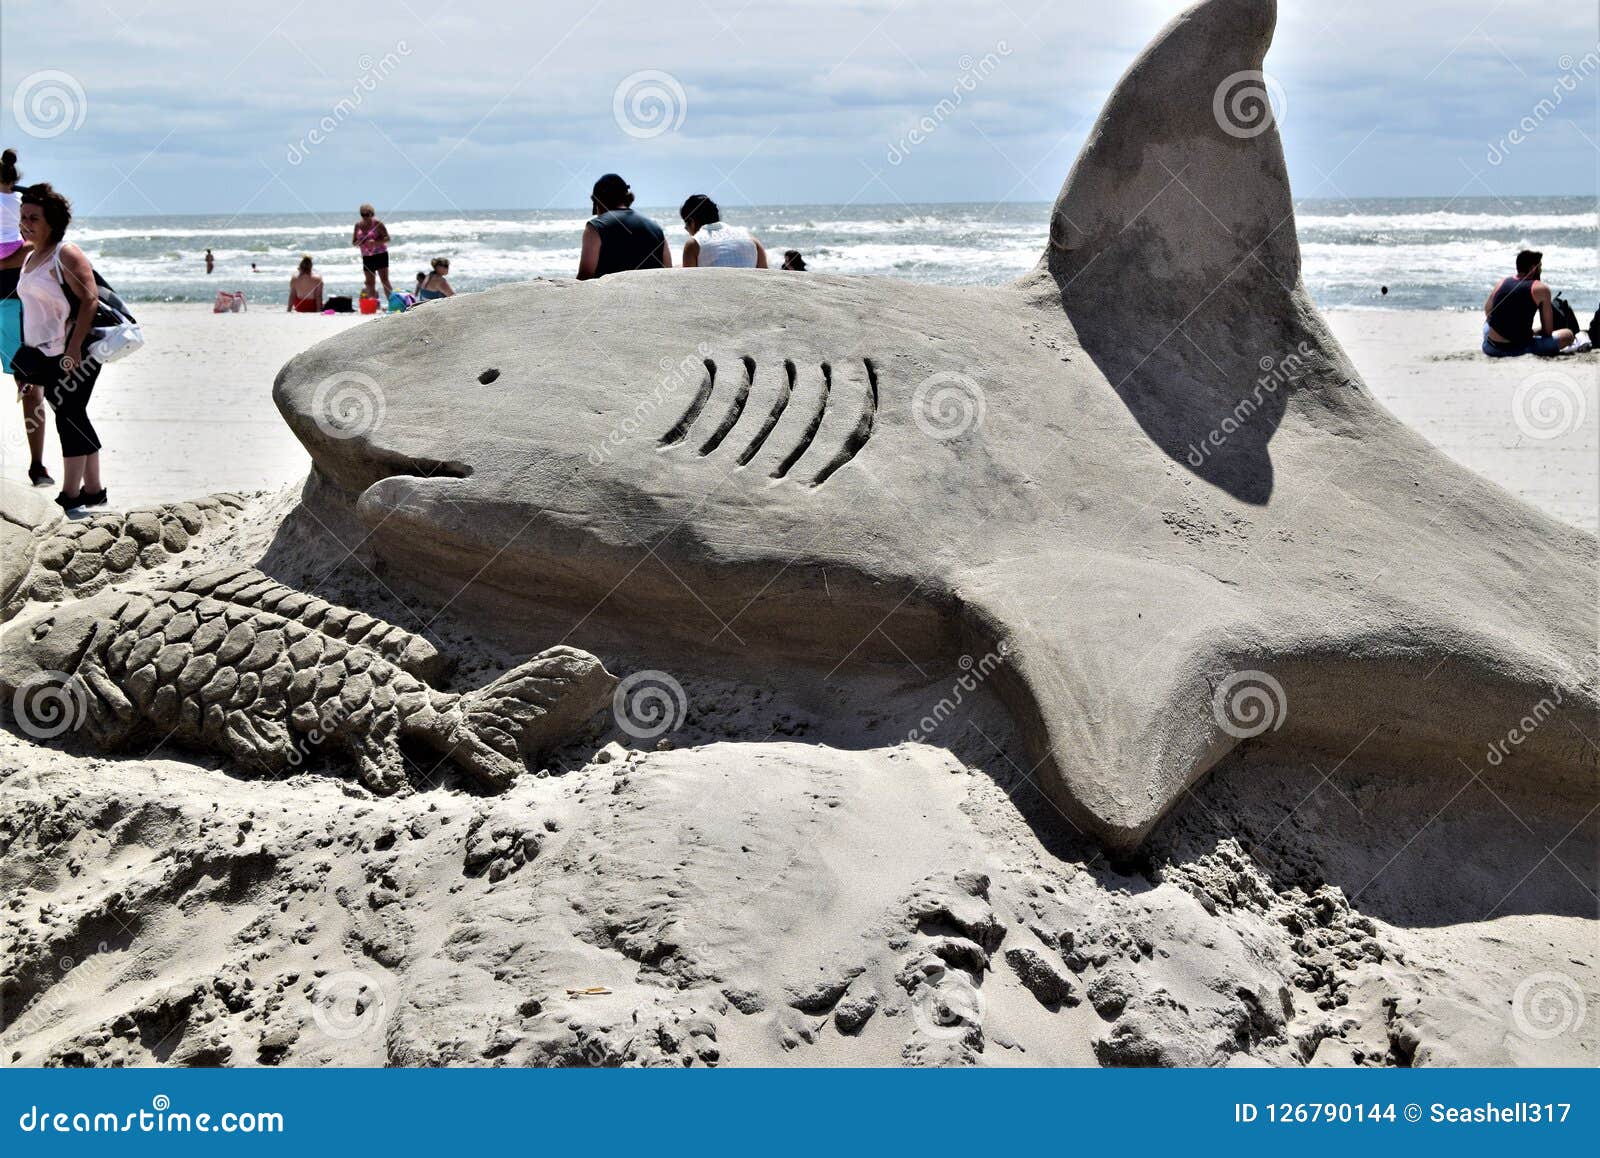 Wildwood Crest Sand Sculpting Contest. Editorial Stock Image Image of